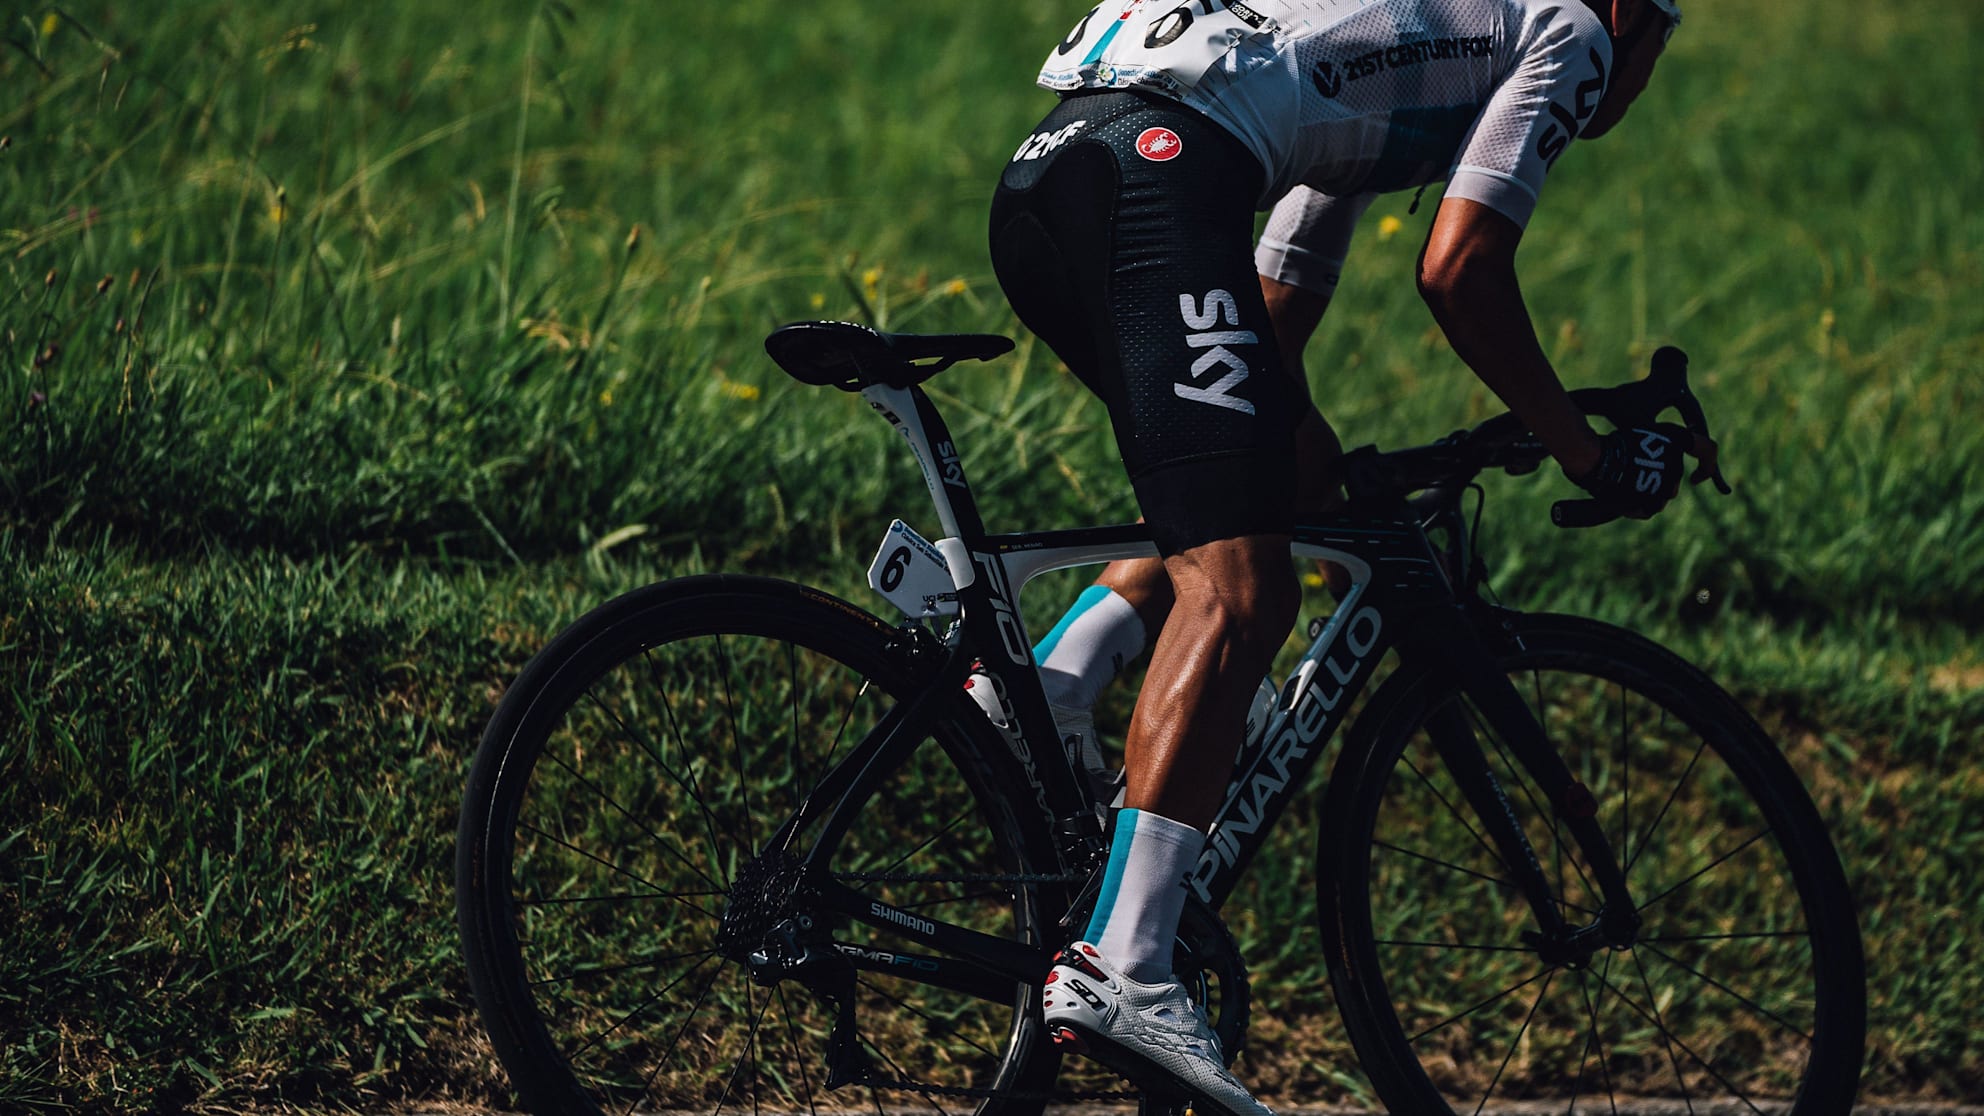 As Sky calls time on professional cycling, Jeremy Whittle reflects on the state of a sport suddenly left without its dominant force – and the long descent that looms after Britain’s climb to the top of WorldTour.